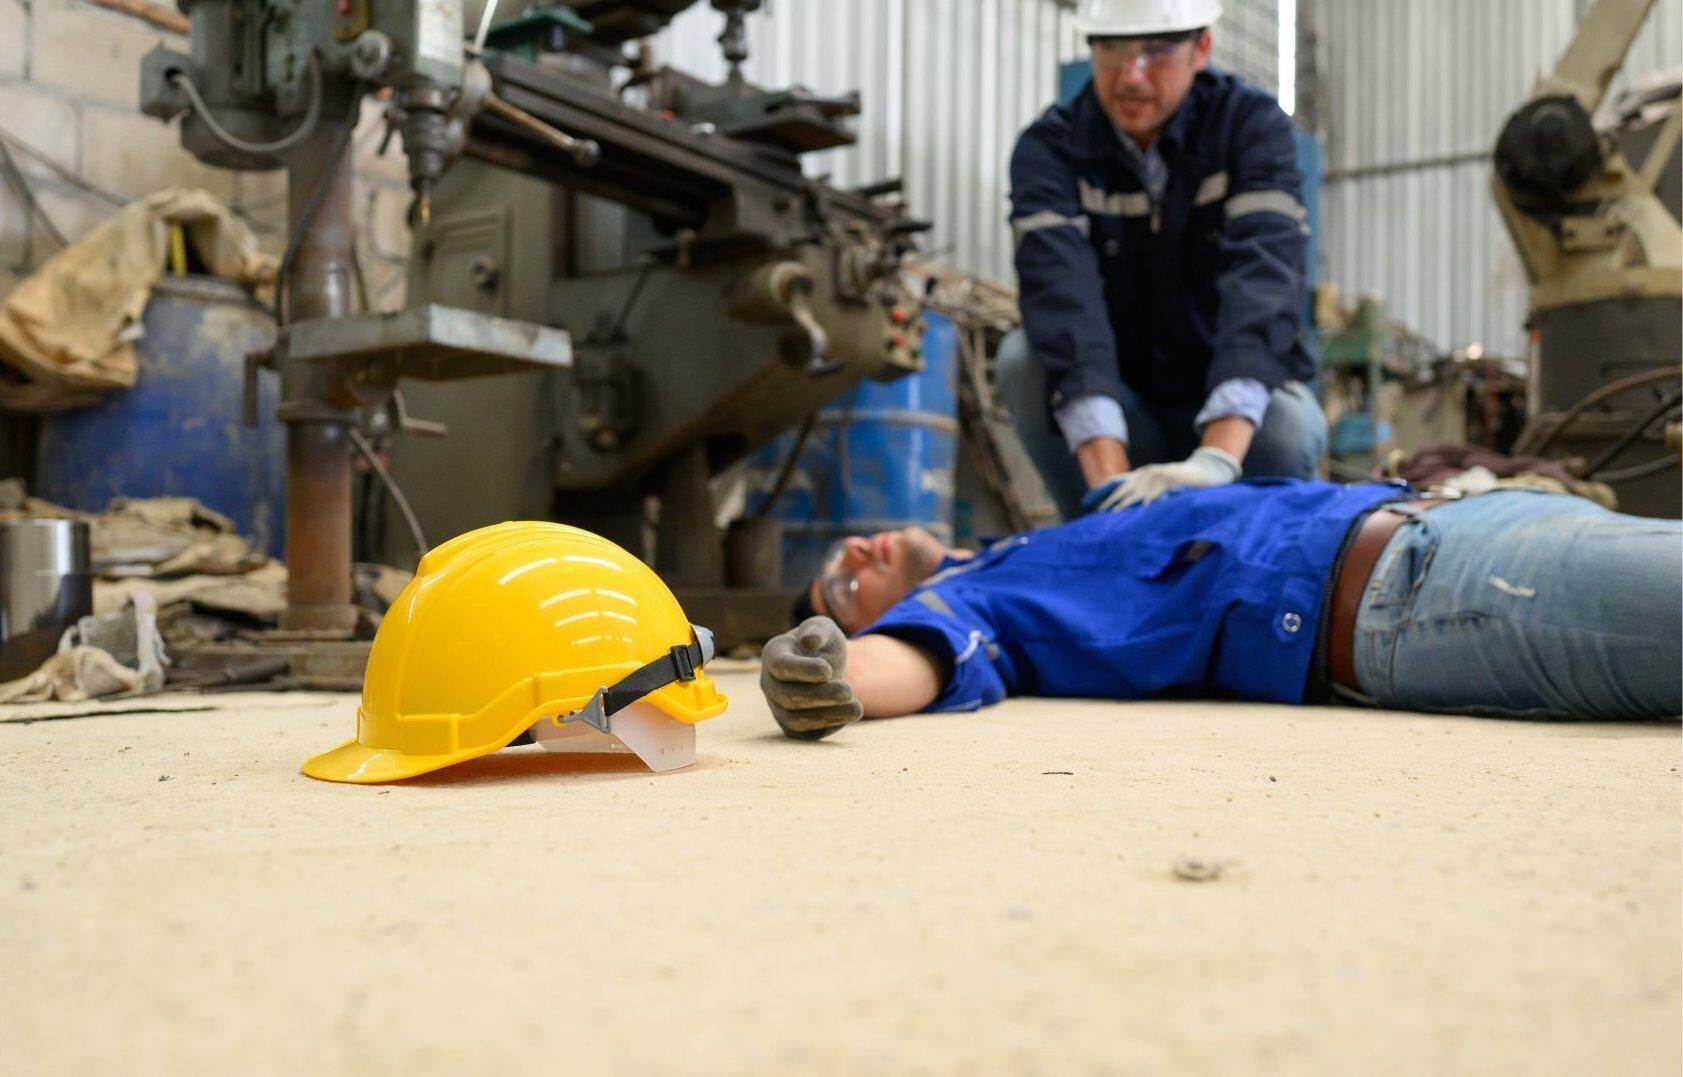 An unconscious man who has been injured on the job who will file for workers compensation in Pooler, Georgia